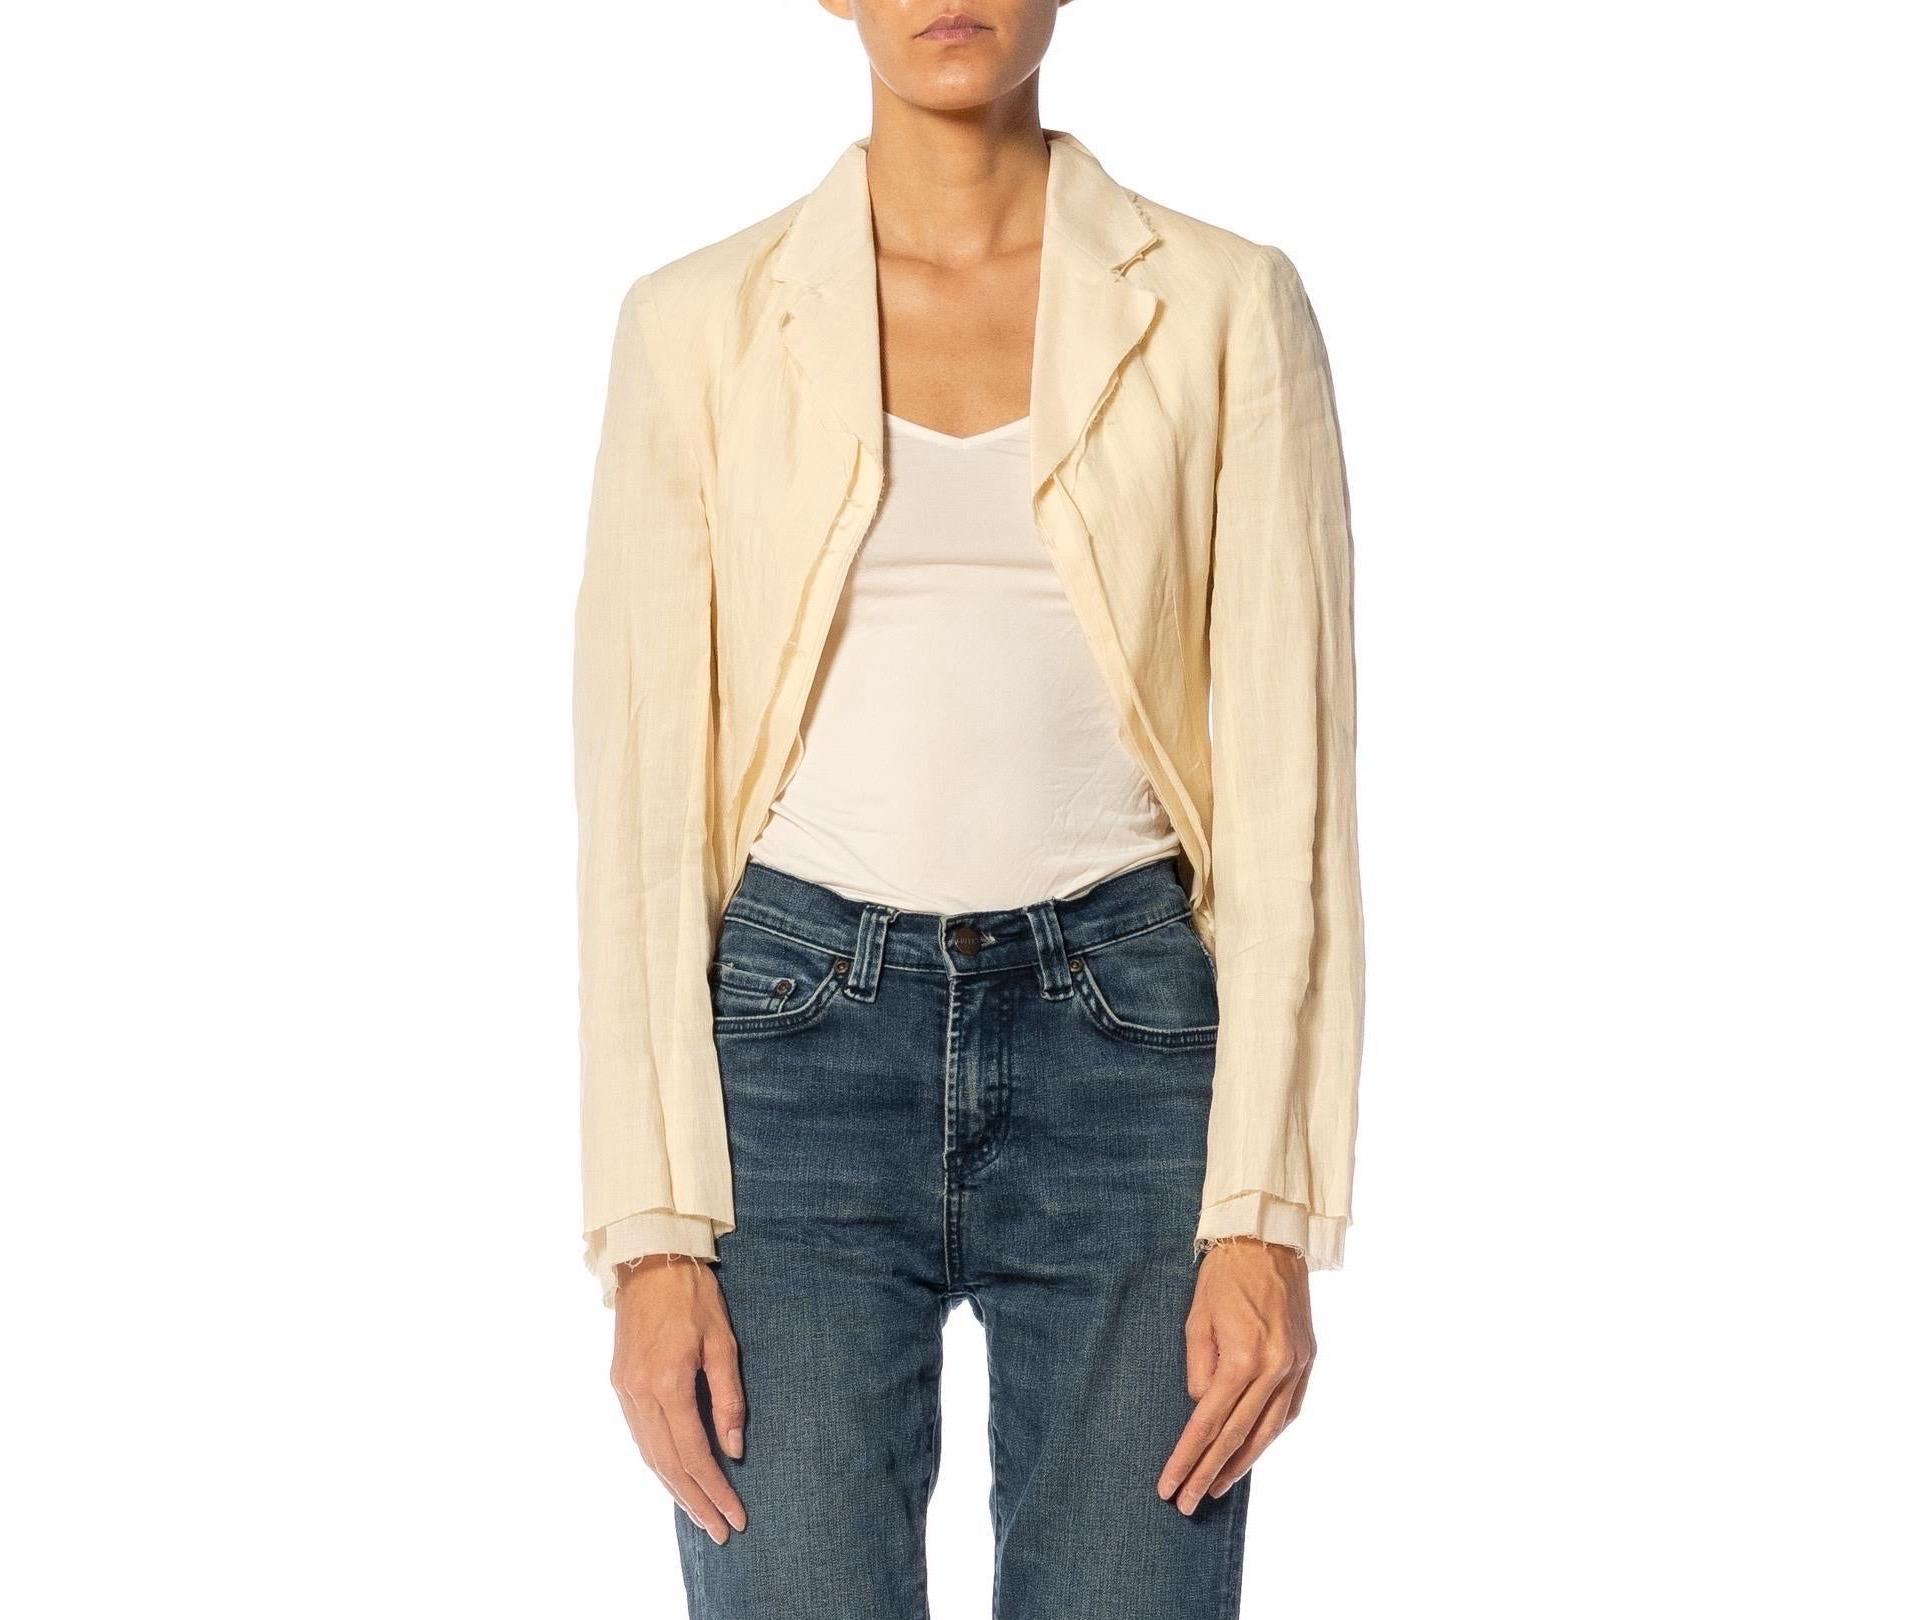 1990S COMME DES GARCONS Cream Ramie & Cotton Distressed Minimalist Jacket 1997 In Excellent Condition For Sale In New York, NY